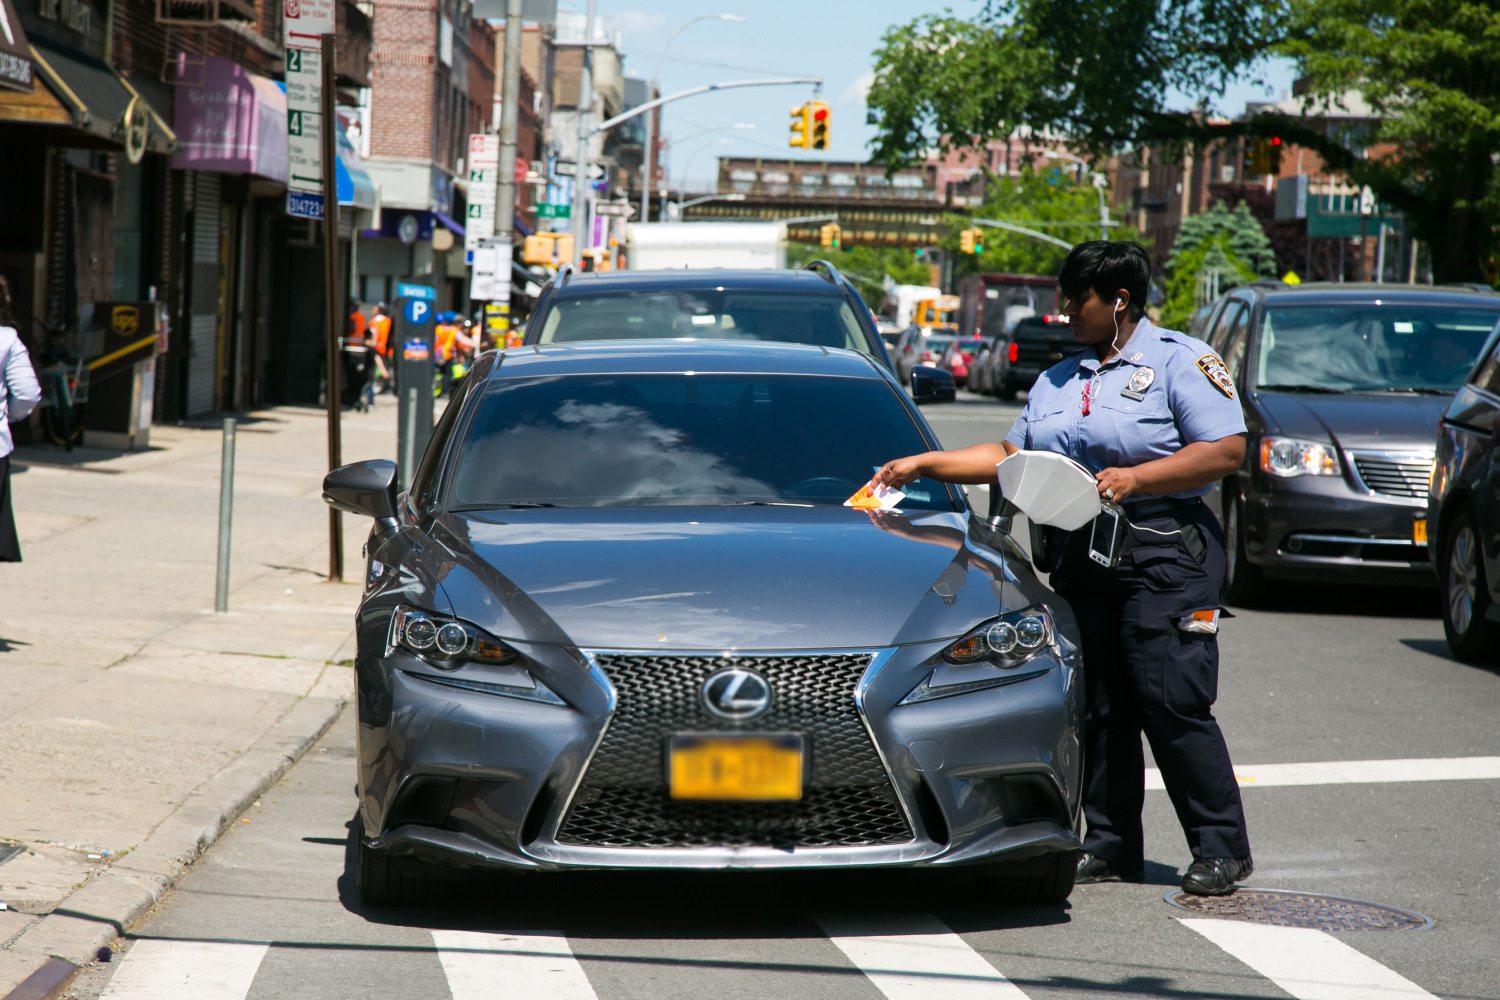 progressive fines can change the way parking tickets work in NYC